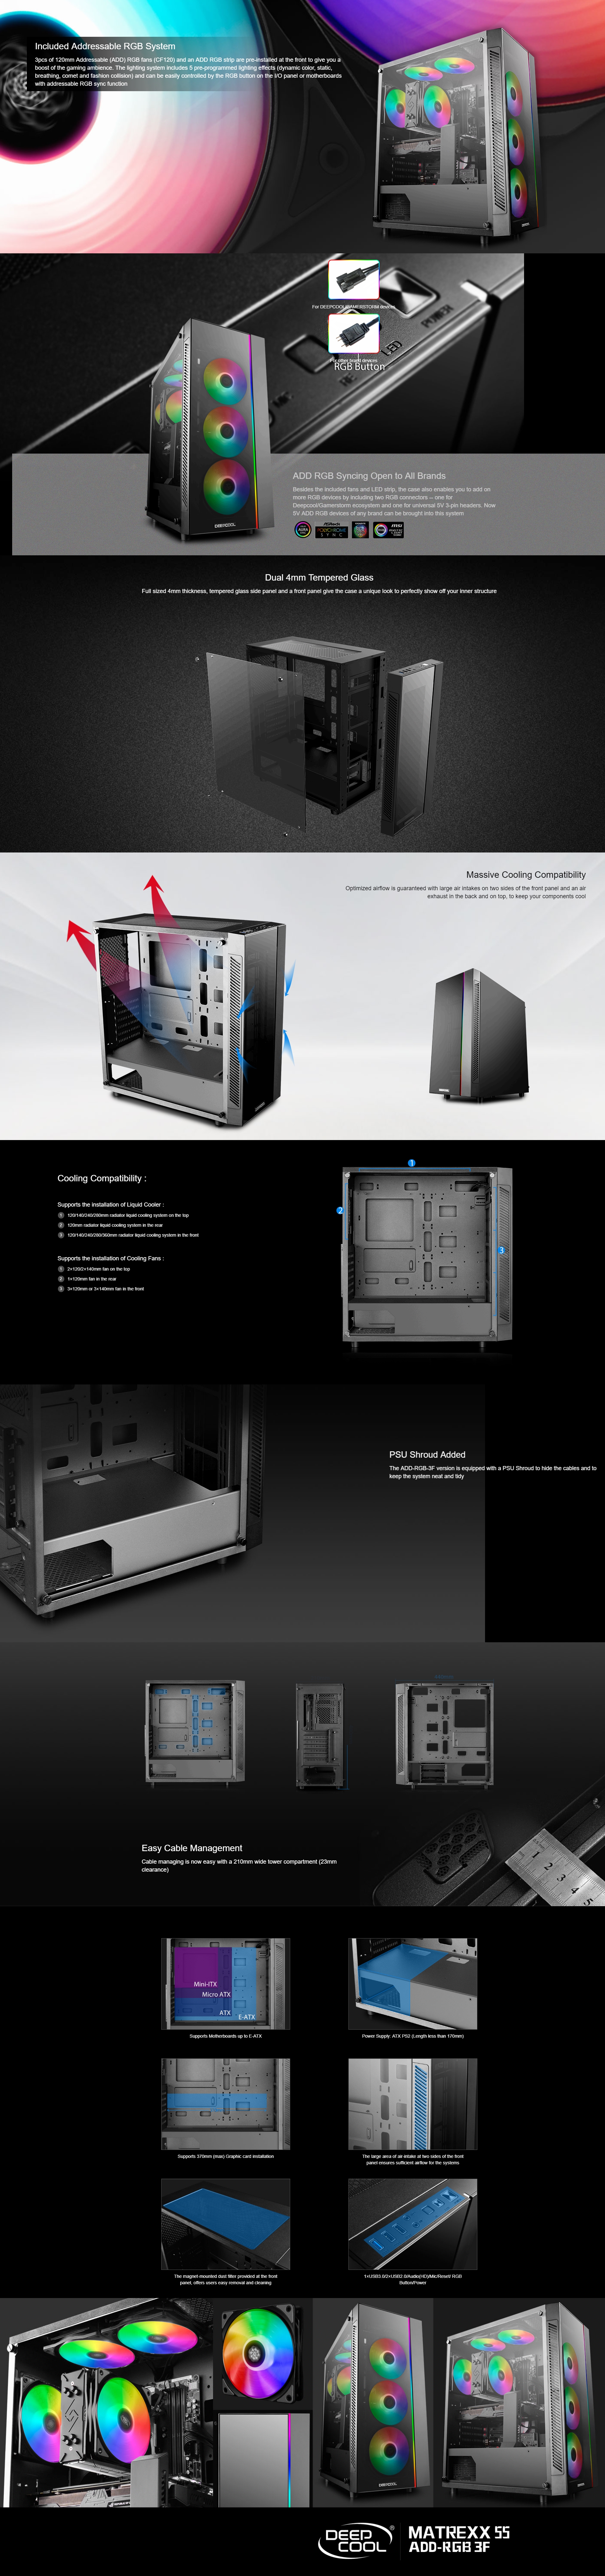 A large marketing image providing additional information about the product Deepcool Matrexx 55 Addressable RGB 3F Mid Tower Case w/ Tempered Glass Side Panel - Additional alt info not provided